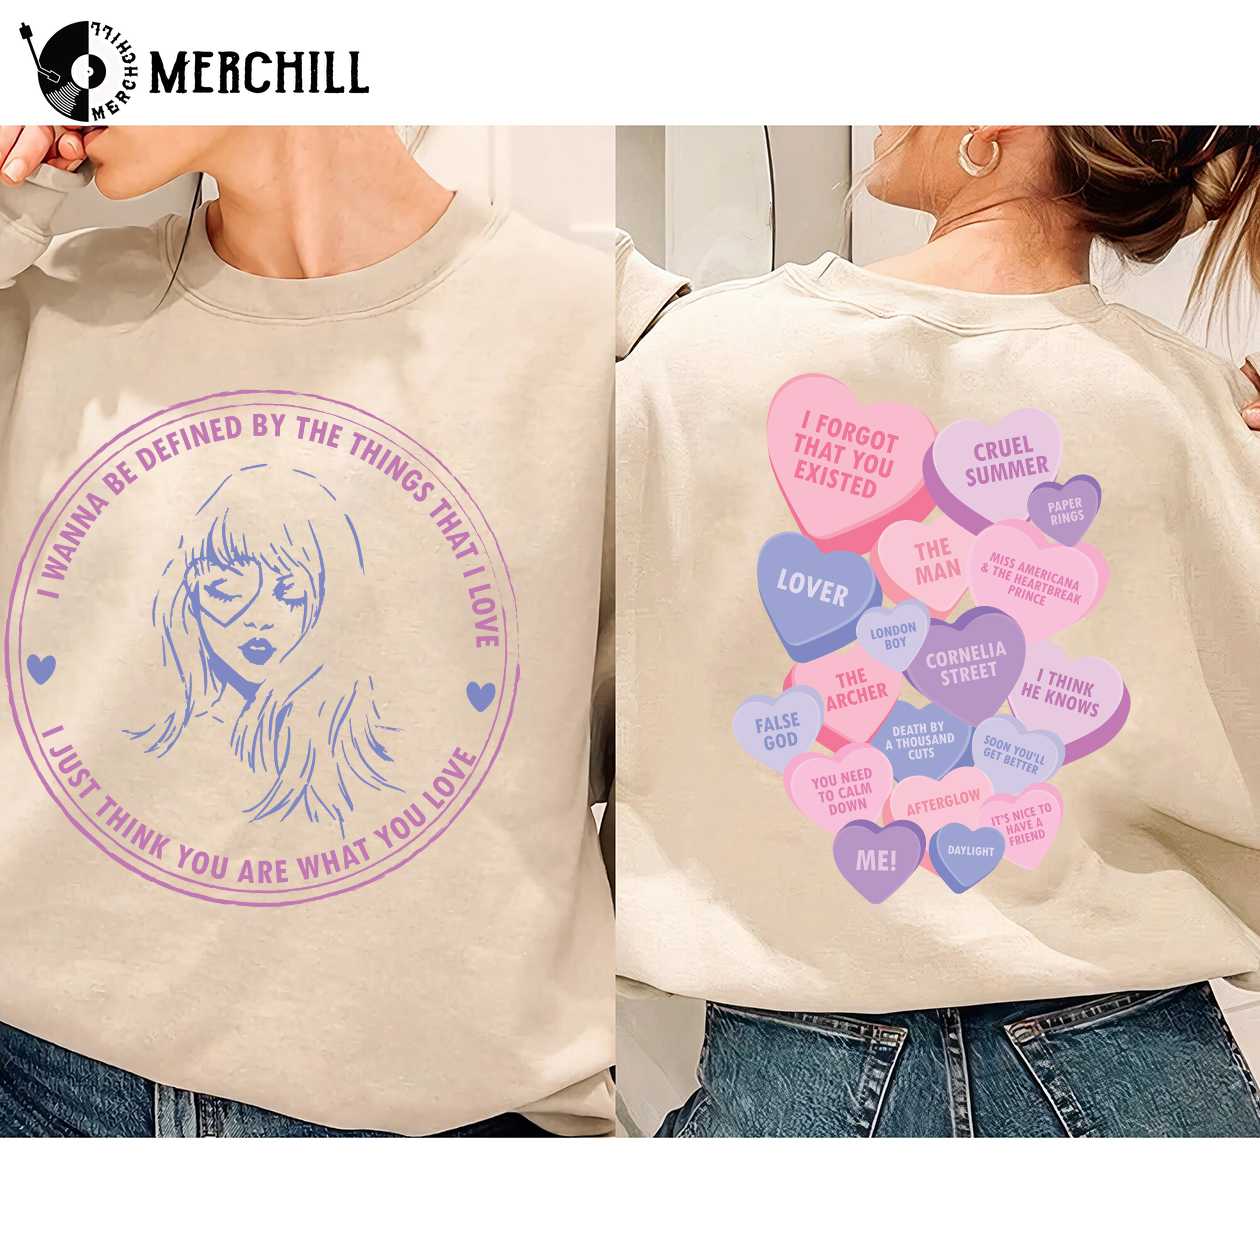 Local Shop Mari Maarte Releases Midnights by Taylor Swift Merch